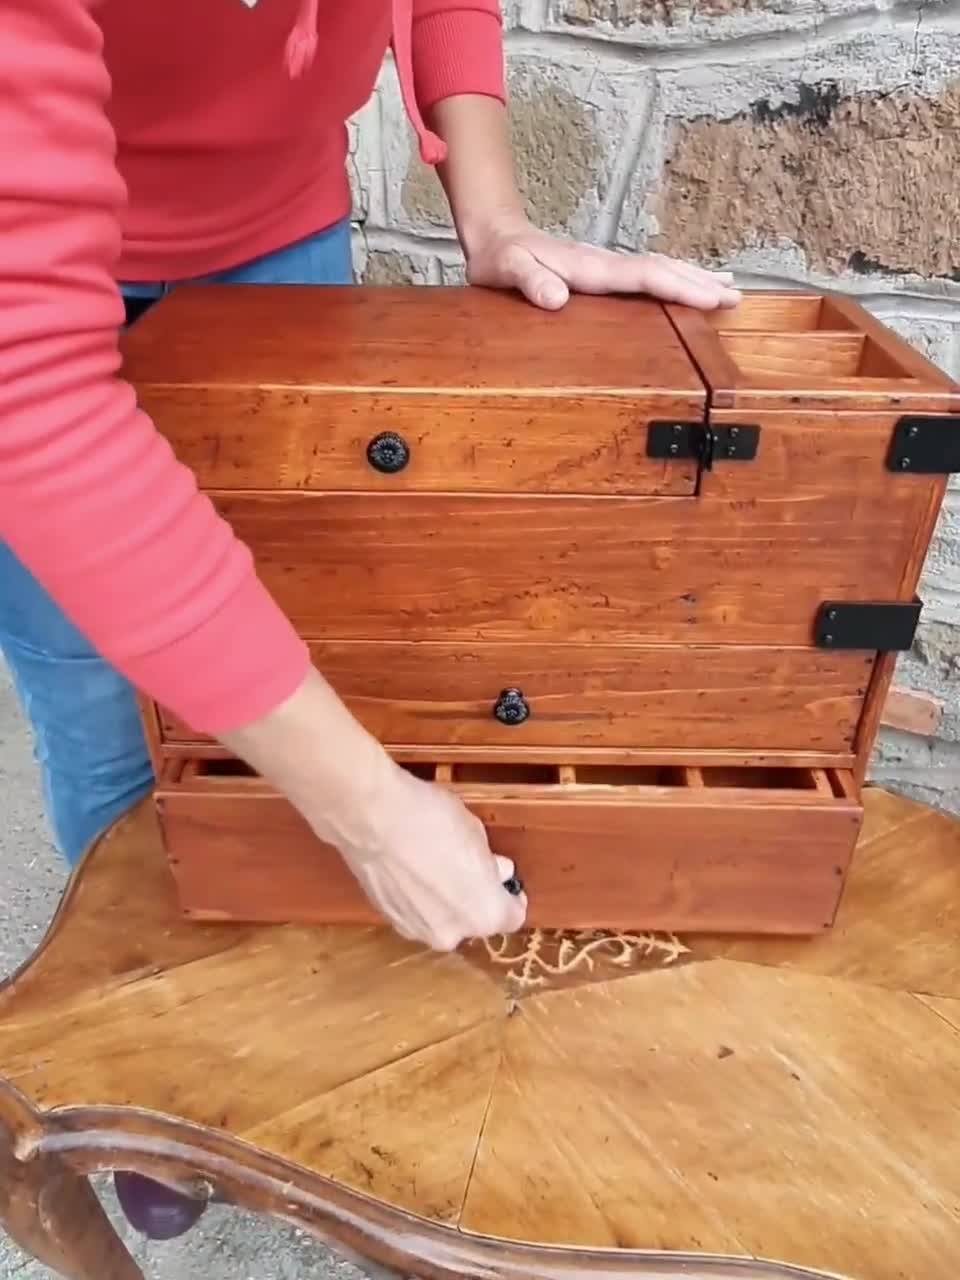 Watch Box for 10 Watches with a Secret Compartment.